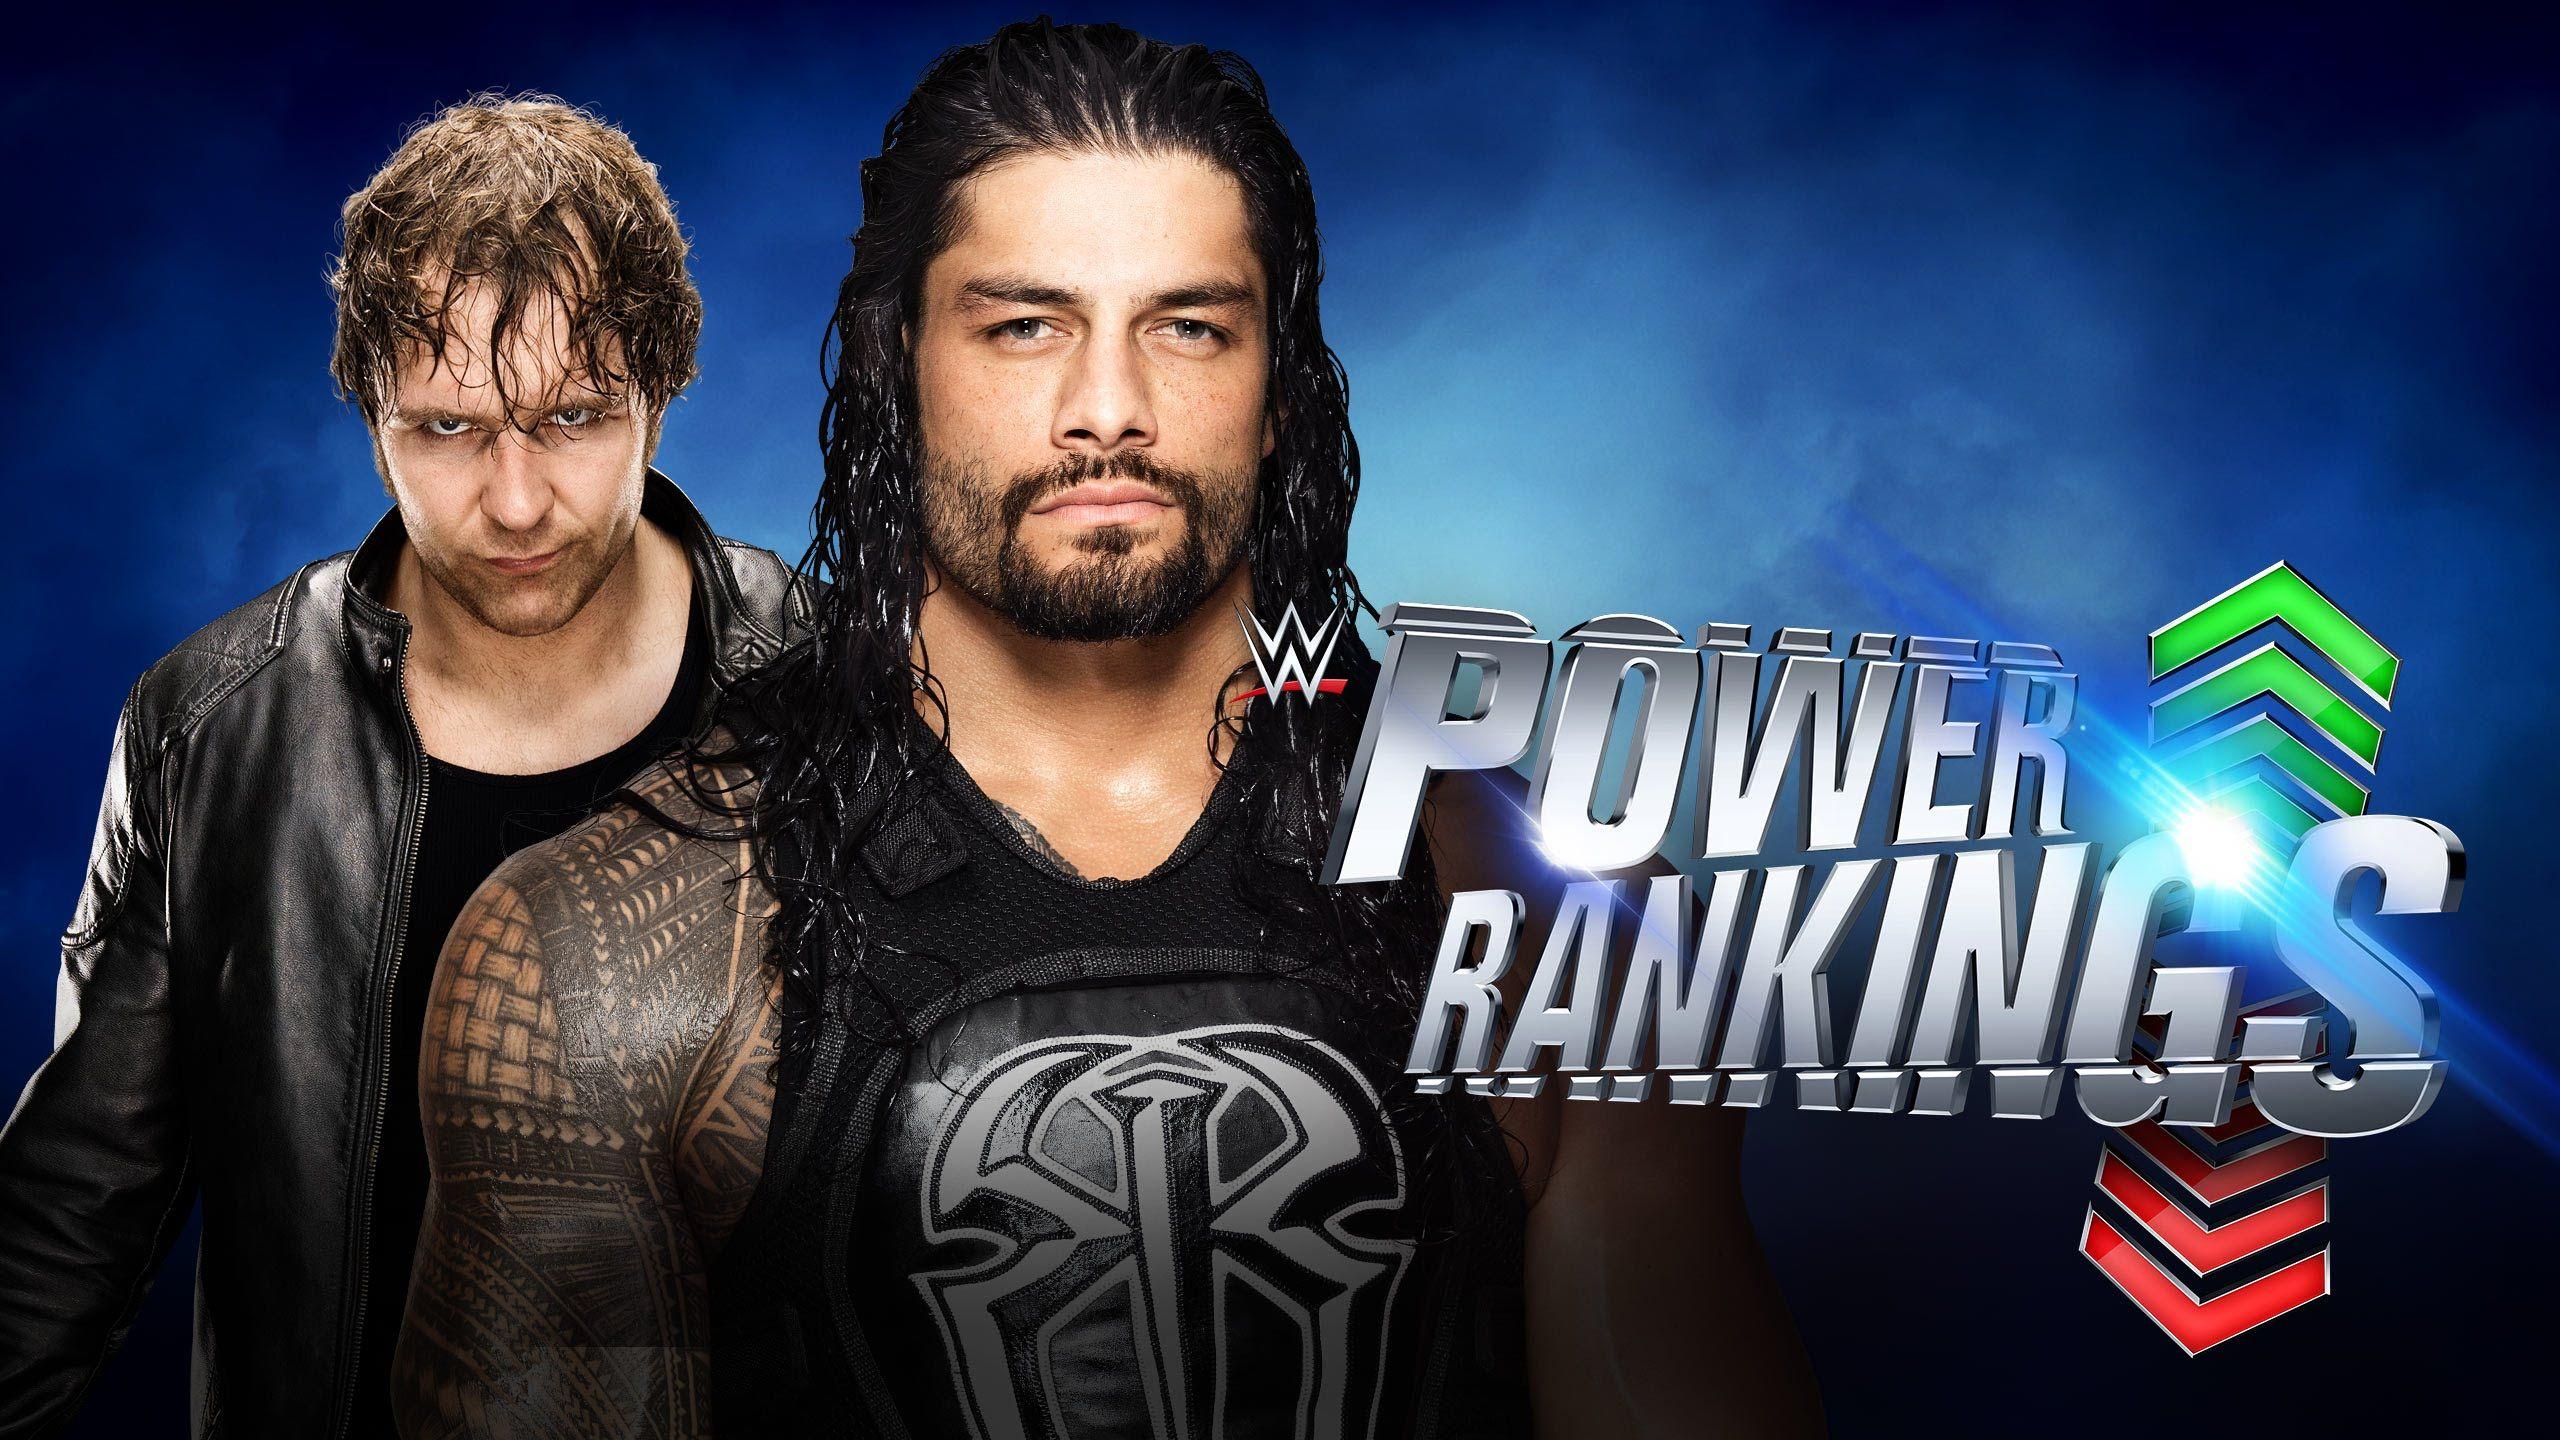 How did WrestleMania affect Roman Reigns & Dean Ambrose's rankings